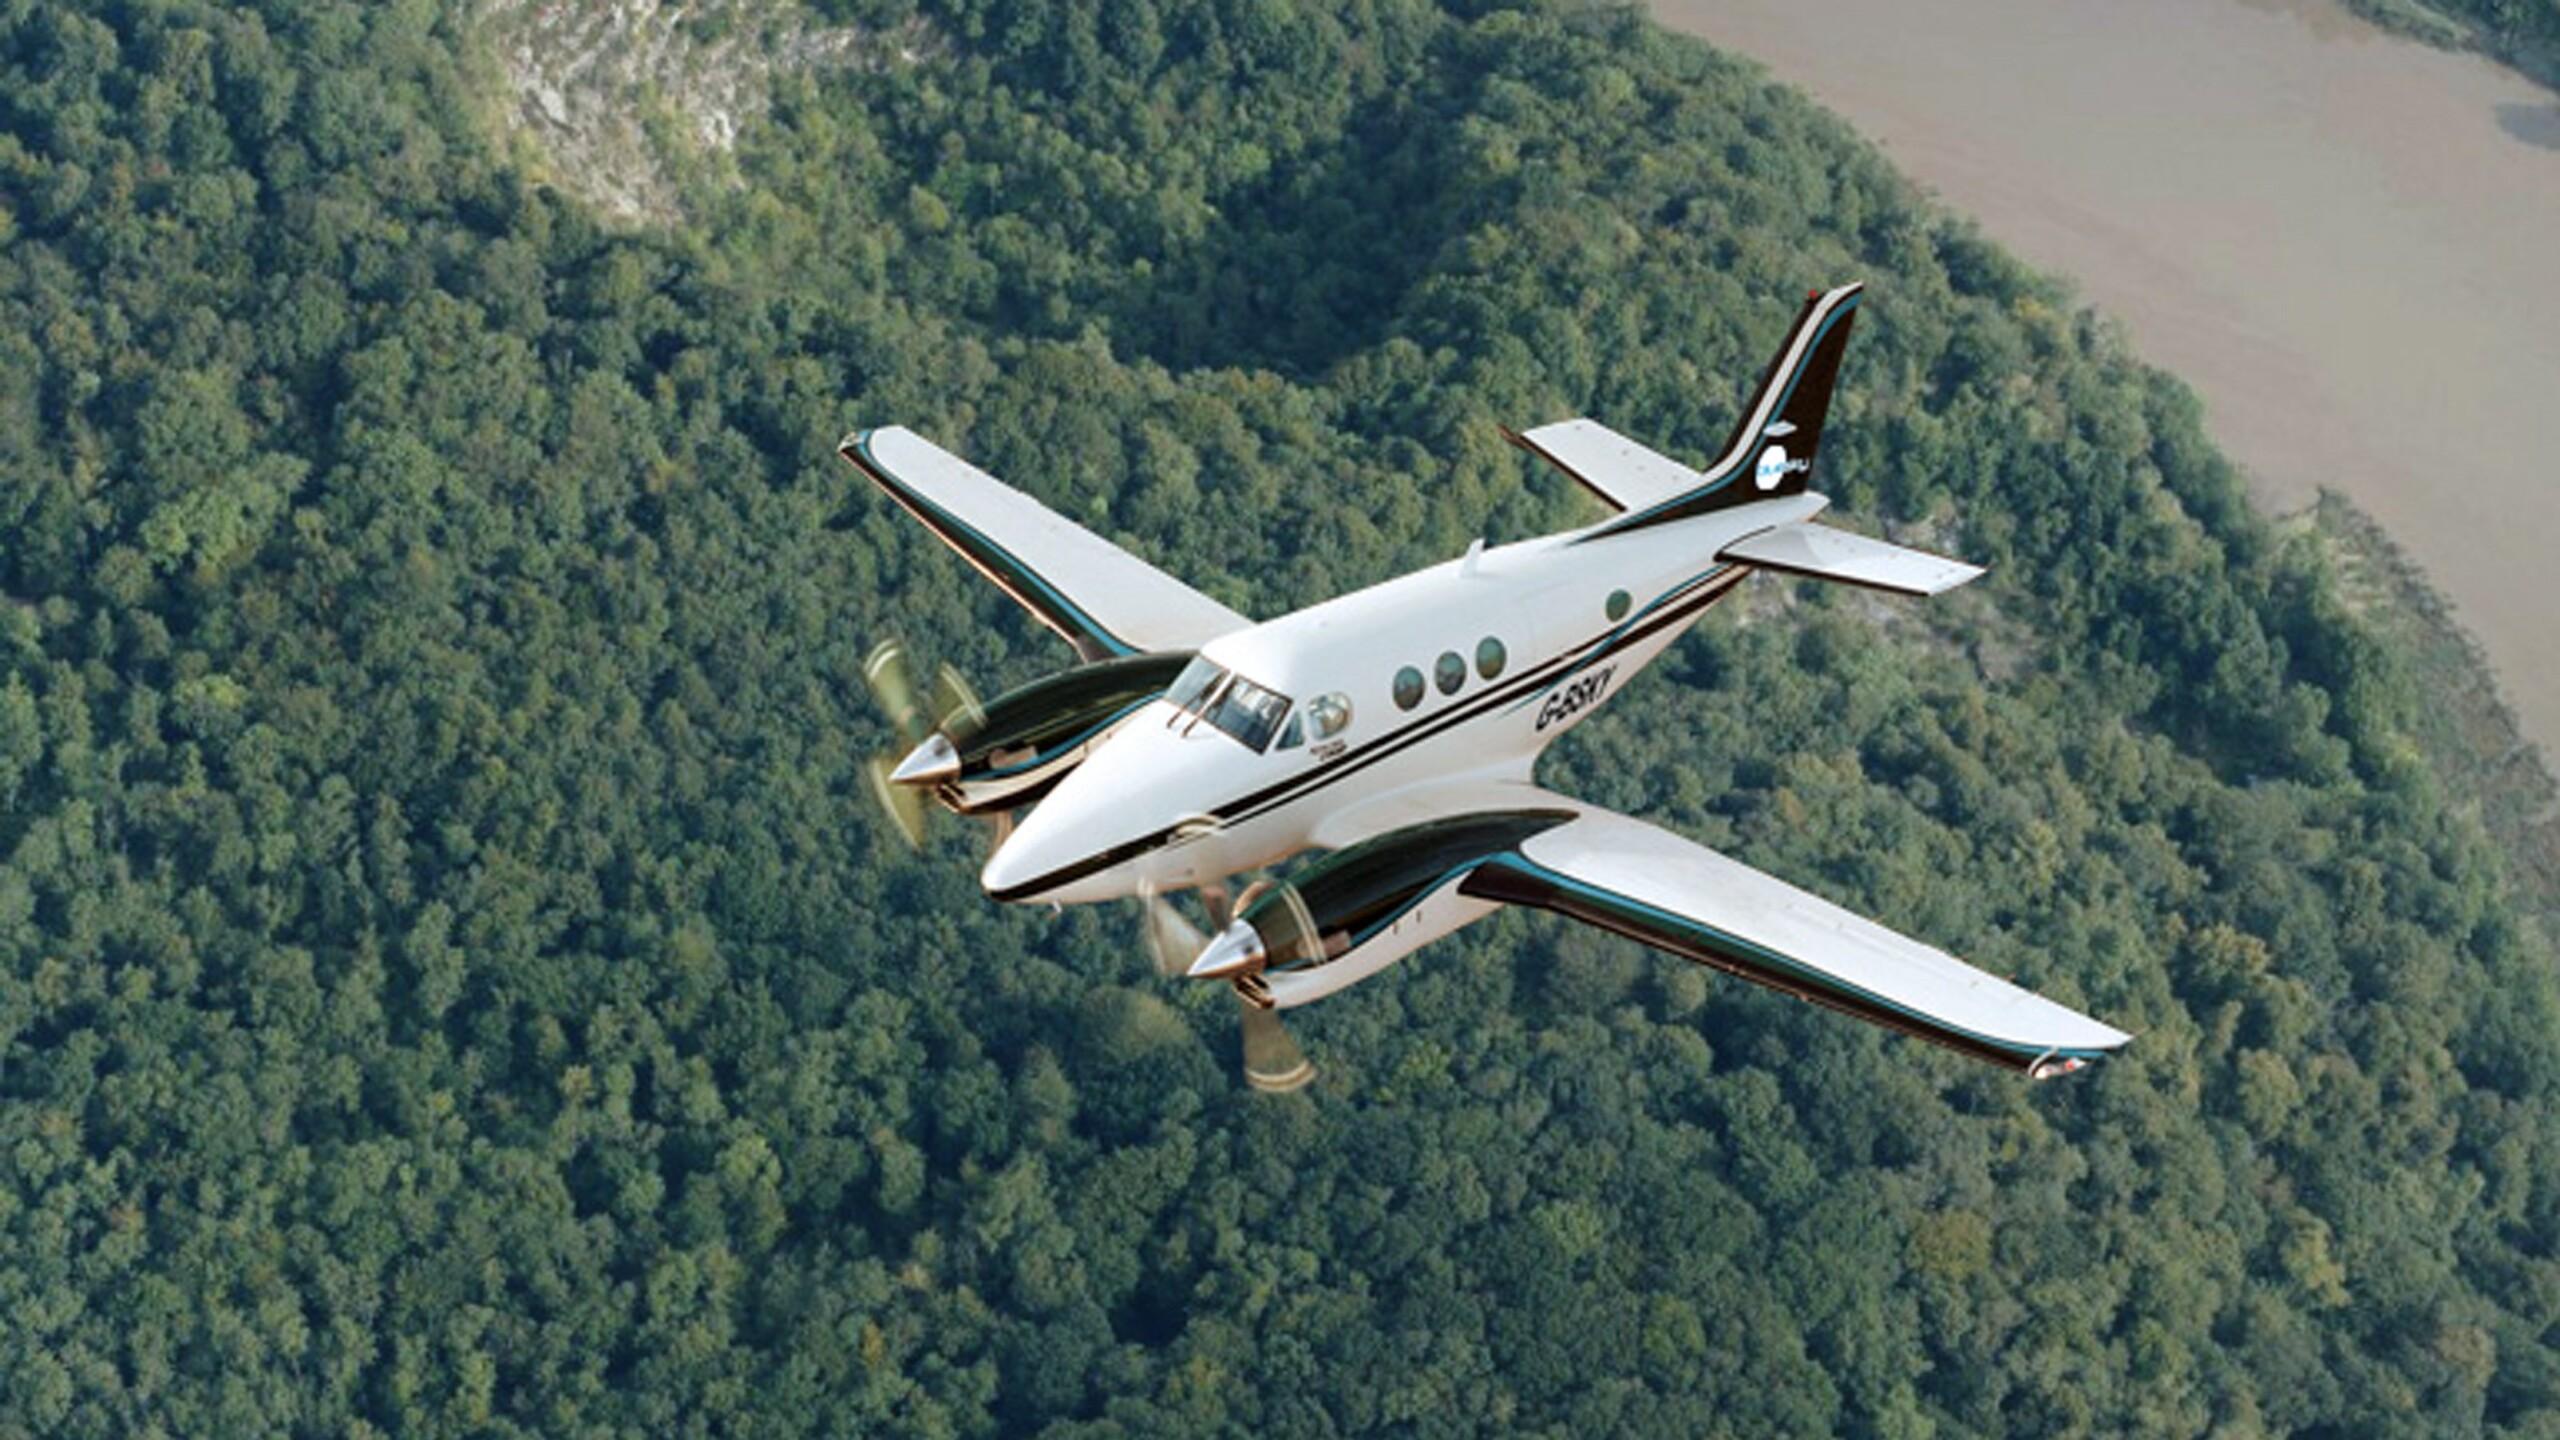 Aerial survey plane flying over a forest